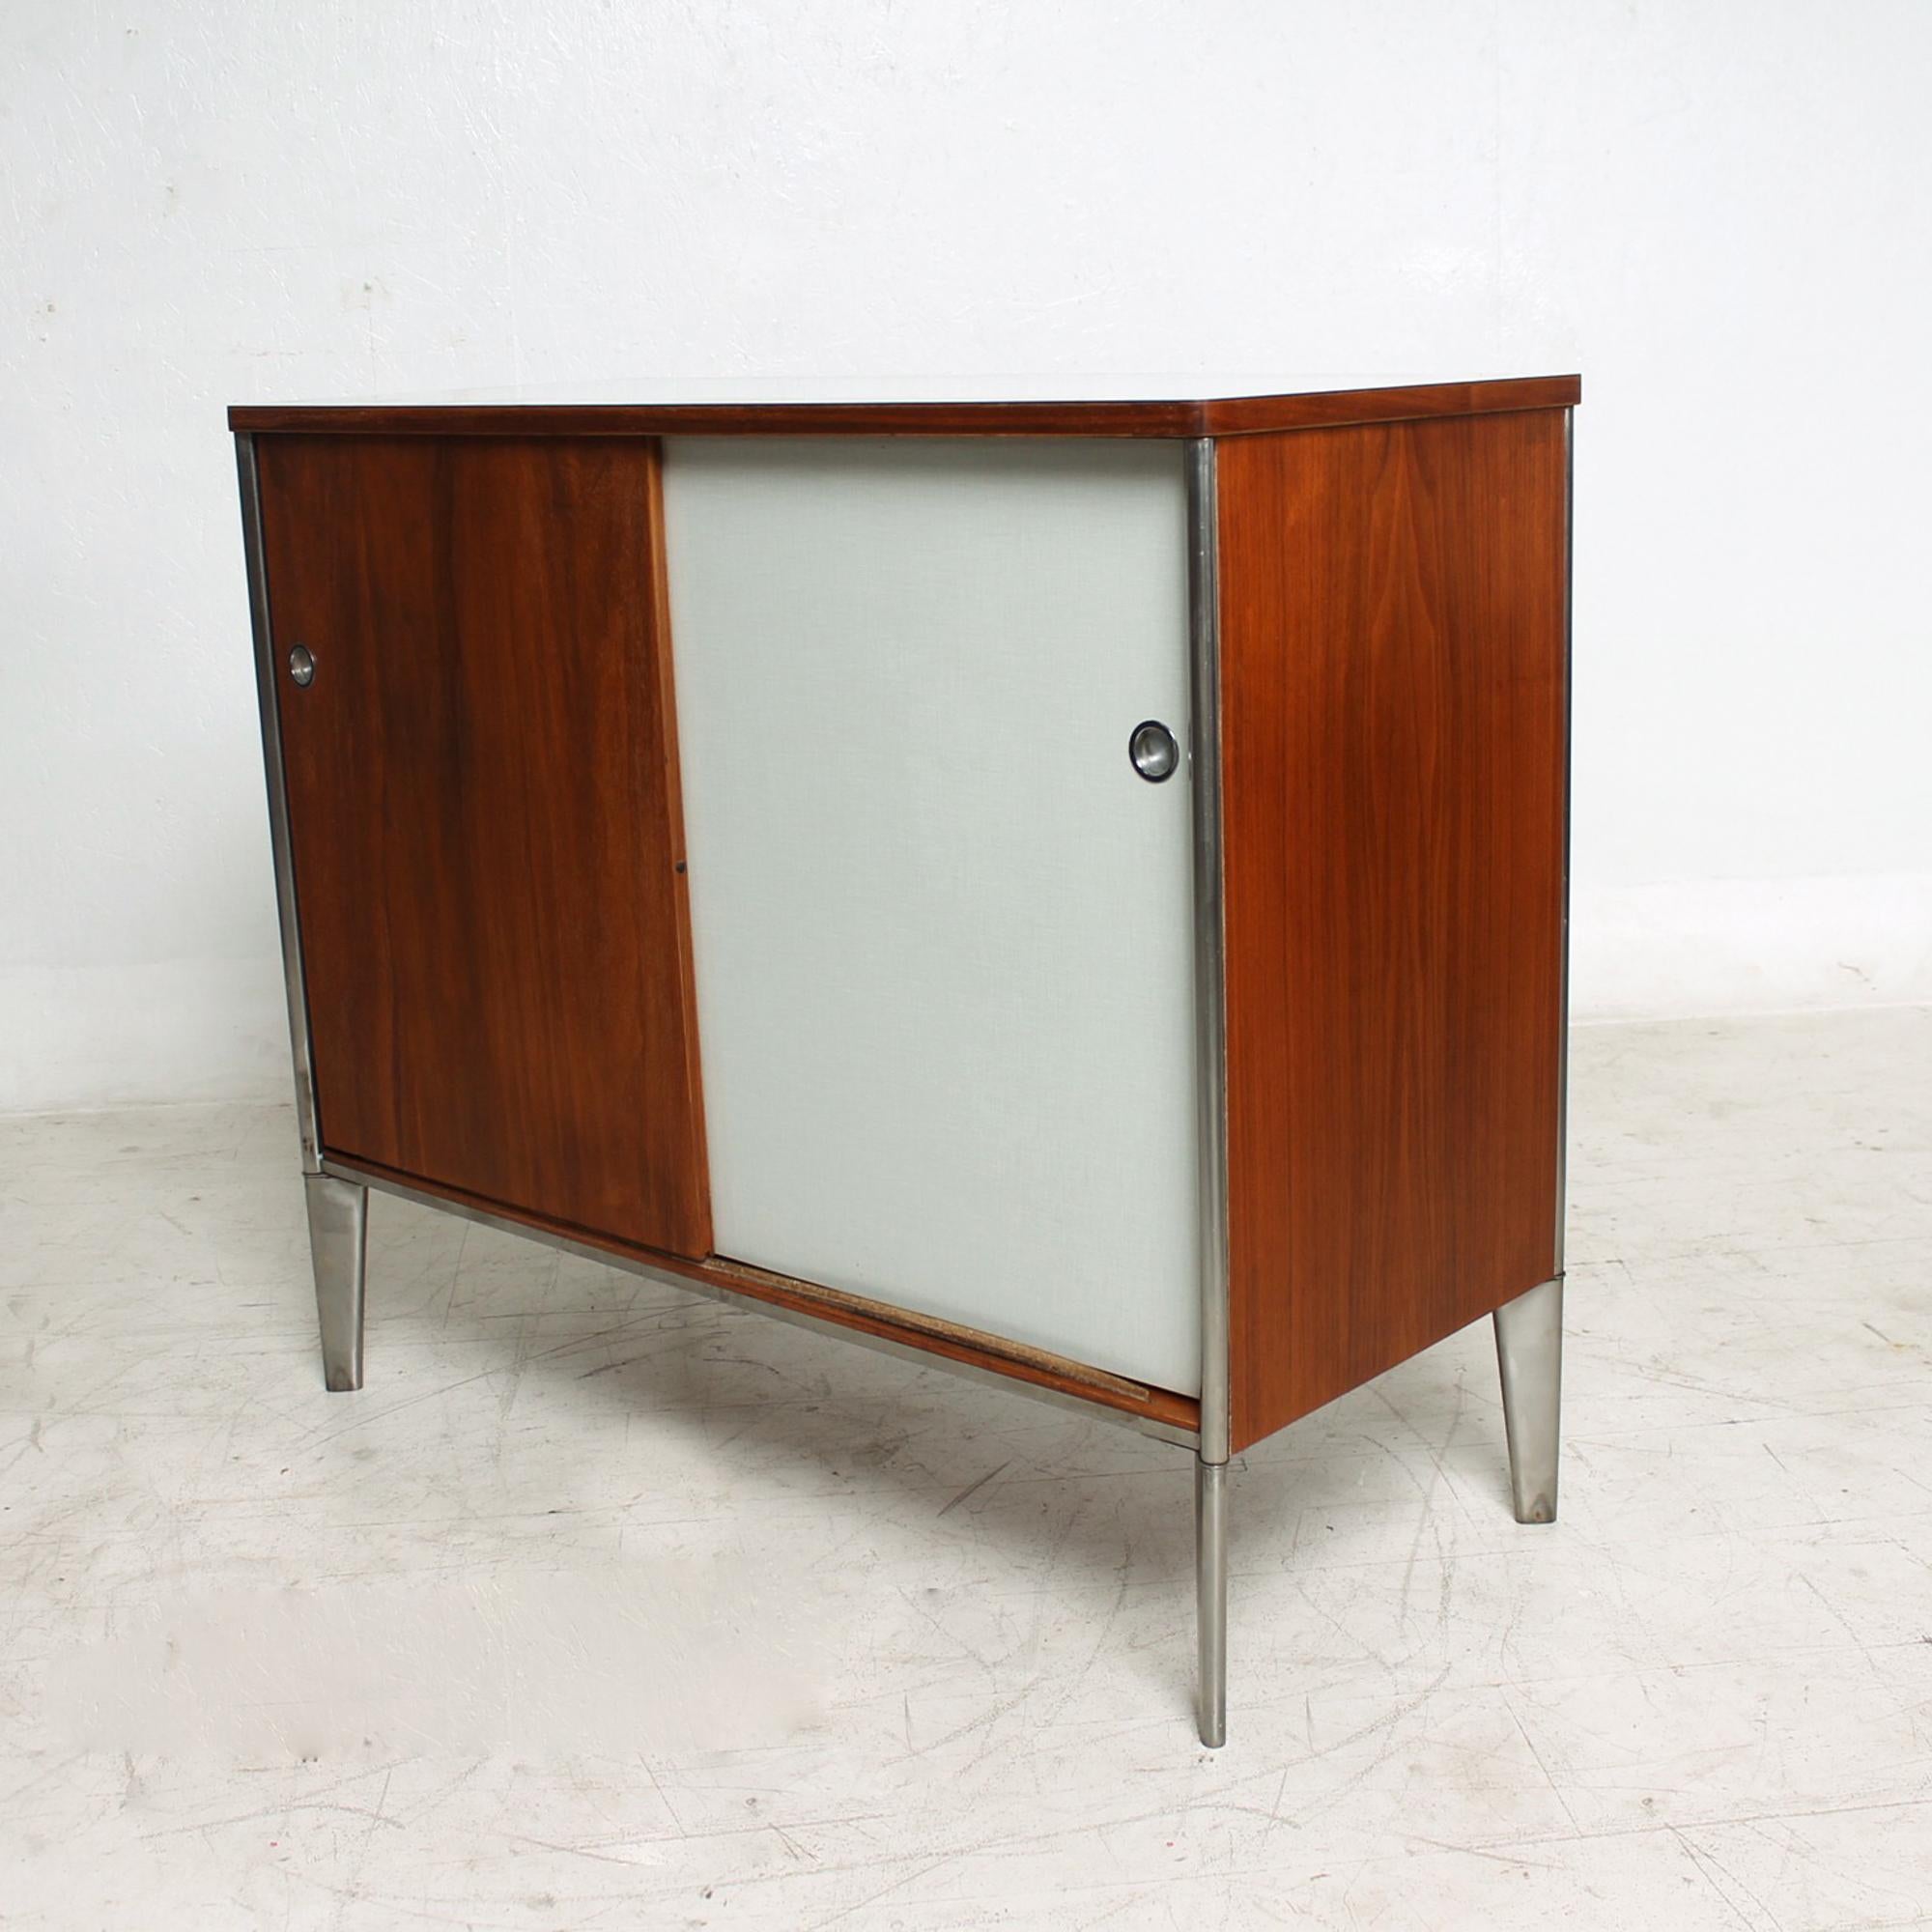 Cabinet
Modern Industrial Storage Cabinet by Industrial designer Raymond Loewy for Hill-Rom Company USA 1950s
 34tall x 39.5 W x 17.5 inches
Walnut Plywood on Sculptural Tapered Stainless-Steel legs. Formica Laminate Top is Light Gray with grid